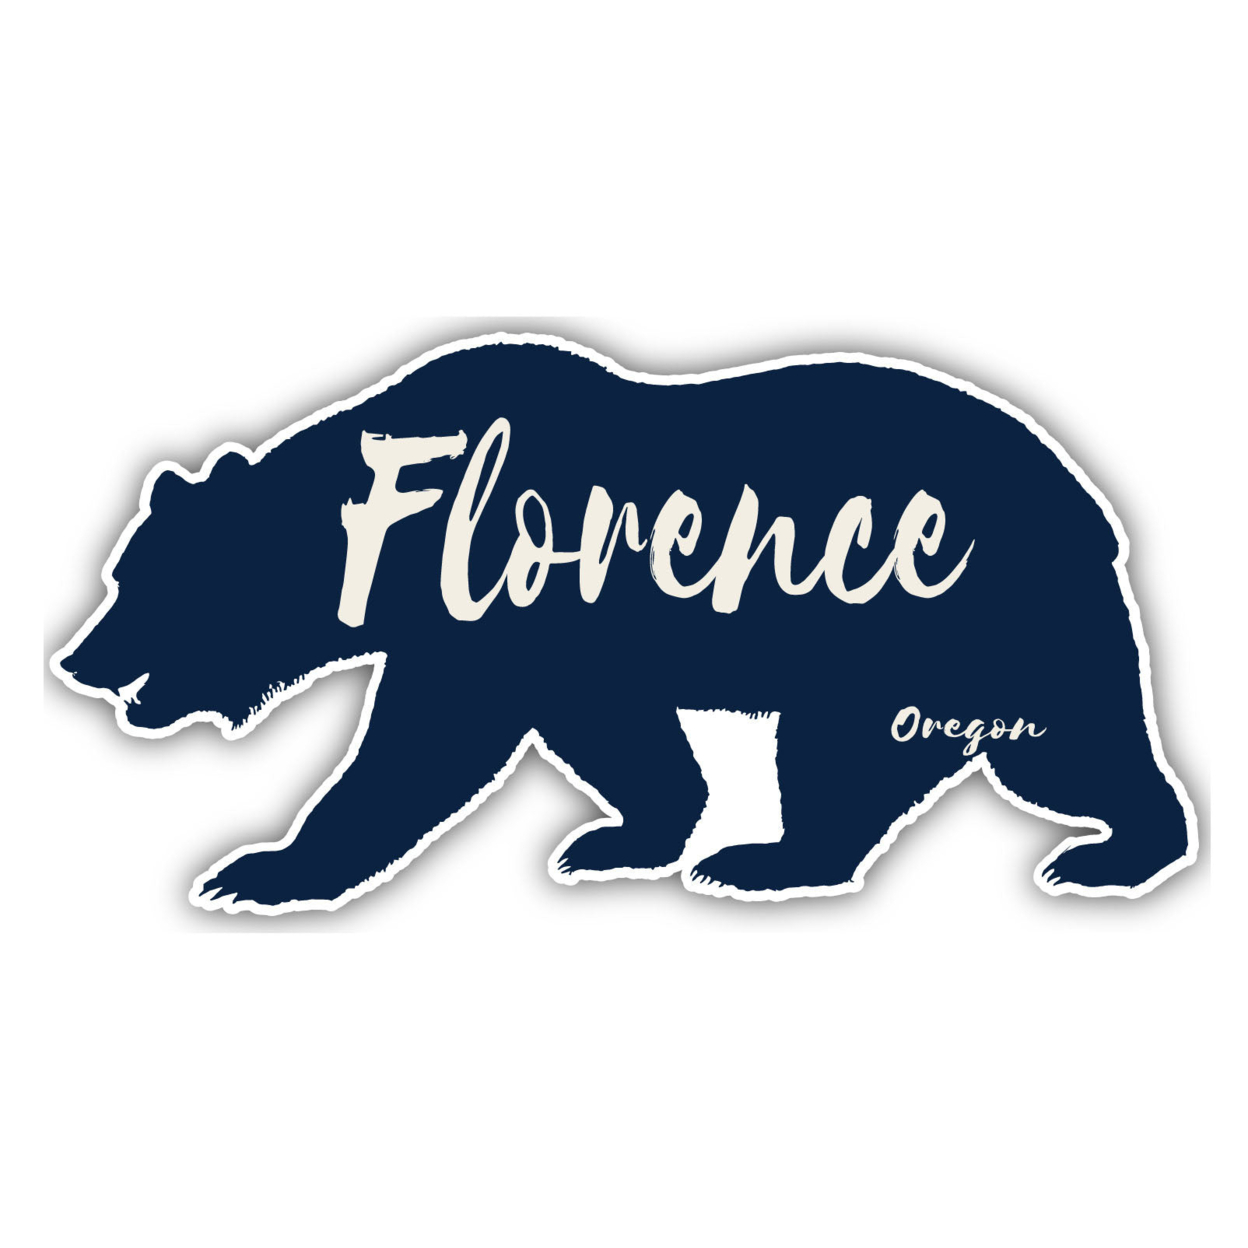 Florence Oregon Souvenir Decorative Stickers (Choose Theme And Size) - 4-Pack, 12-Inch, Bear